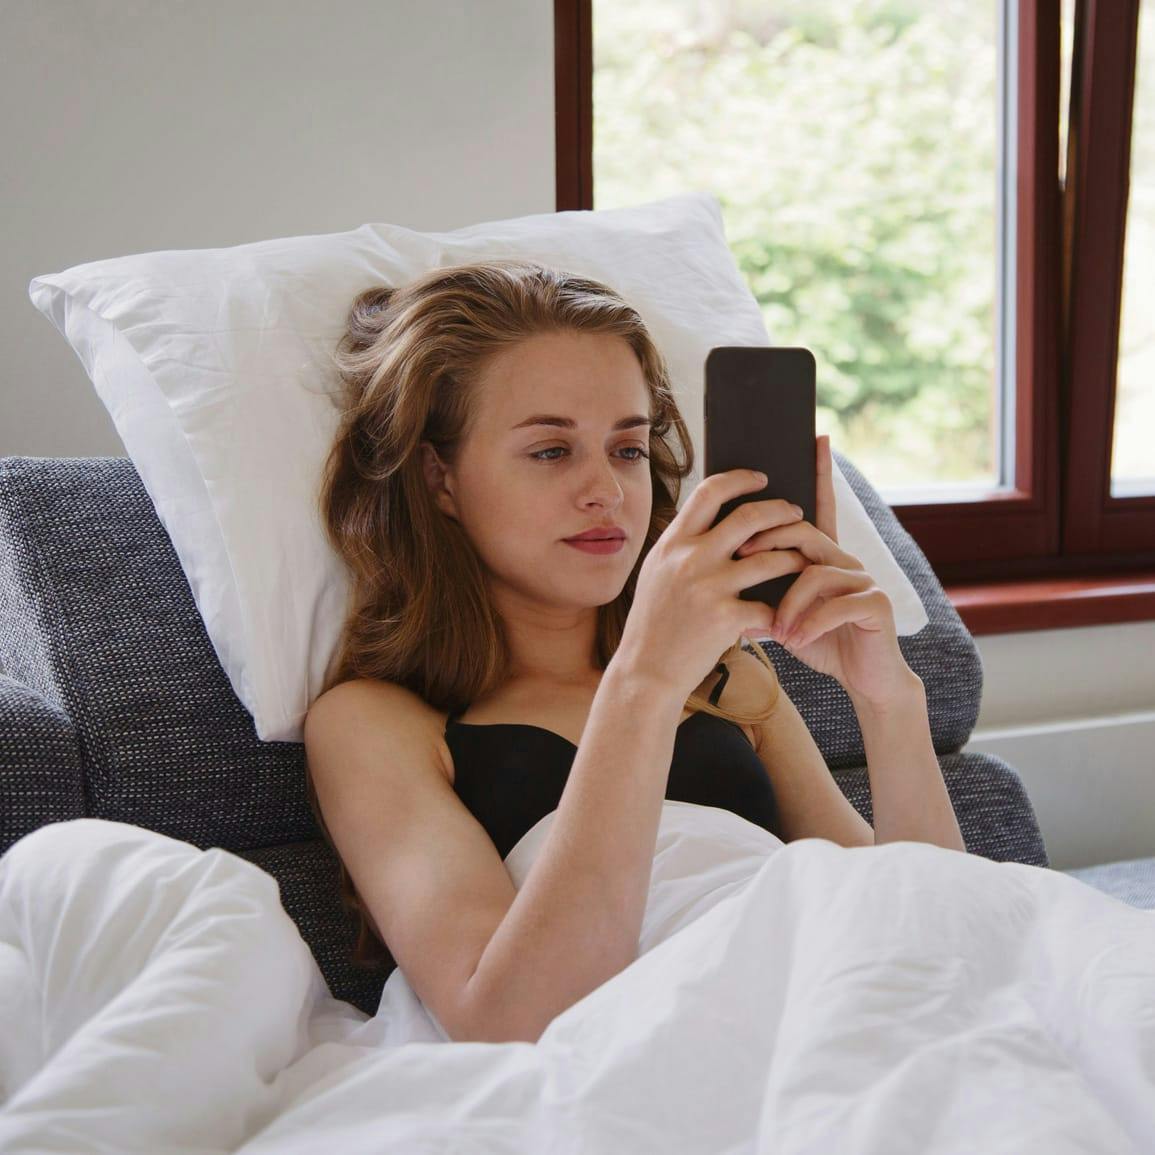 Woman sitting in up bed, covered in sheets, both hands on her phone